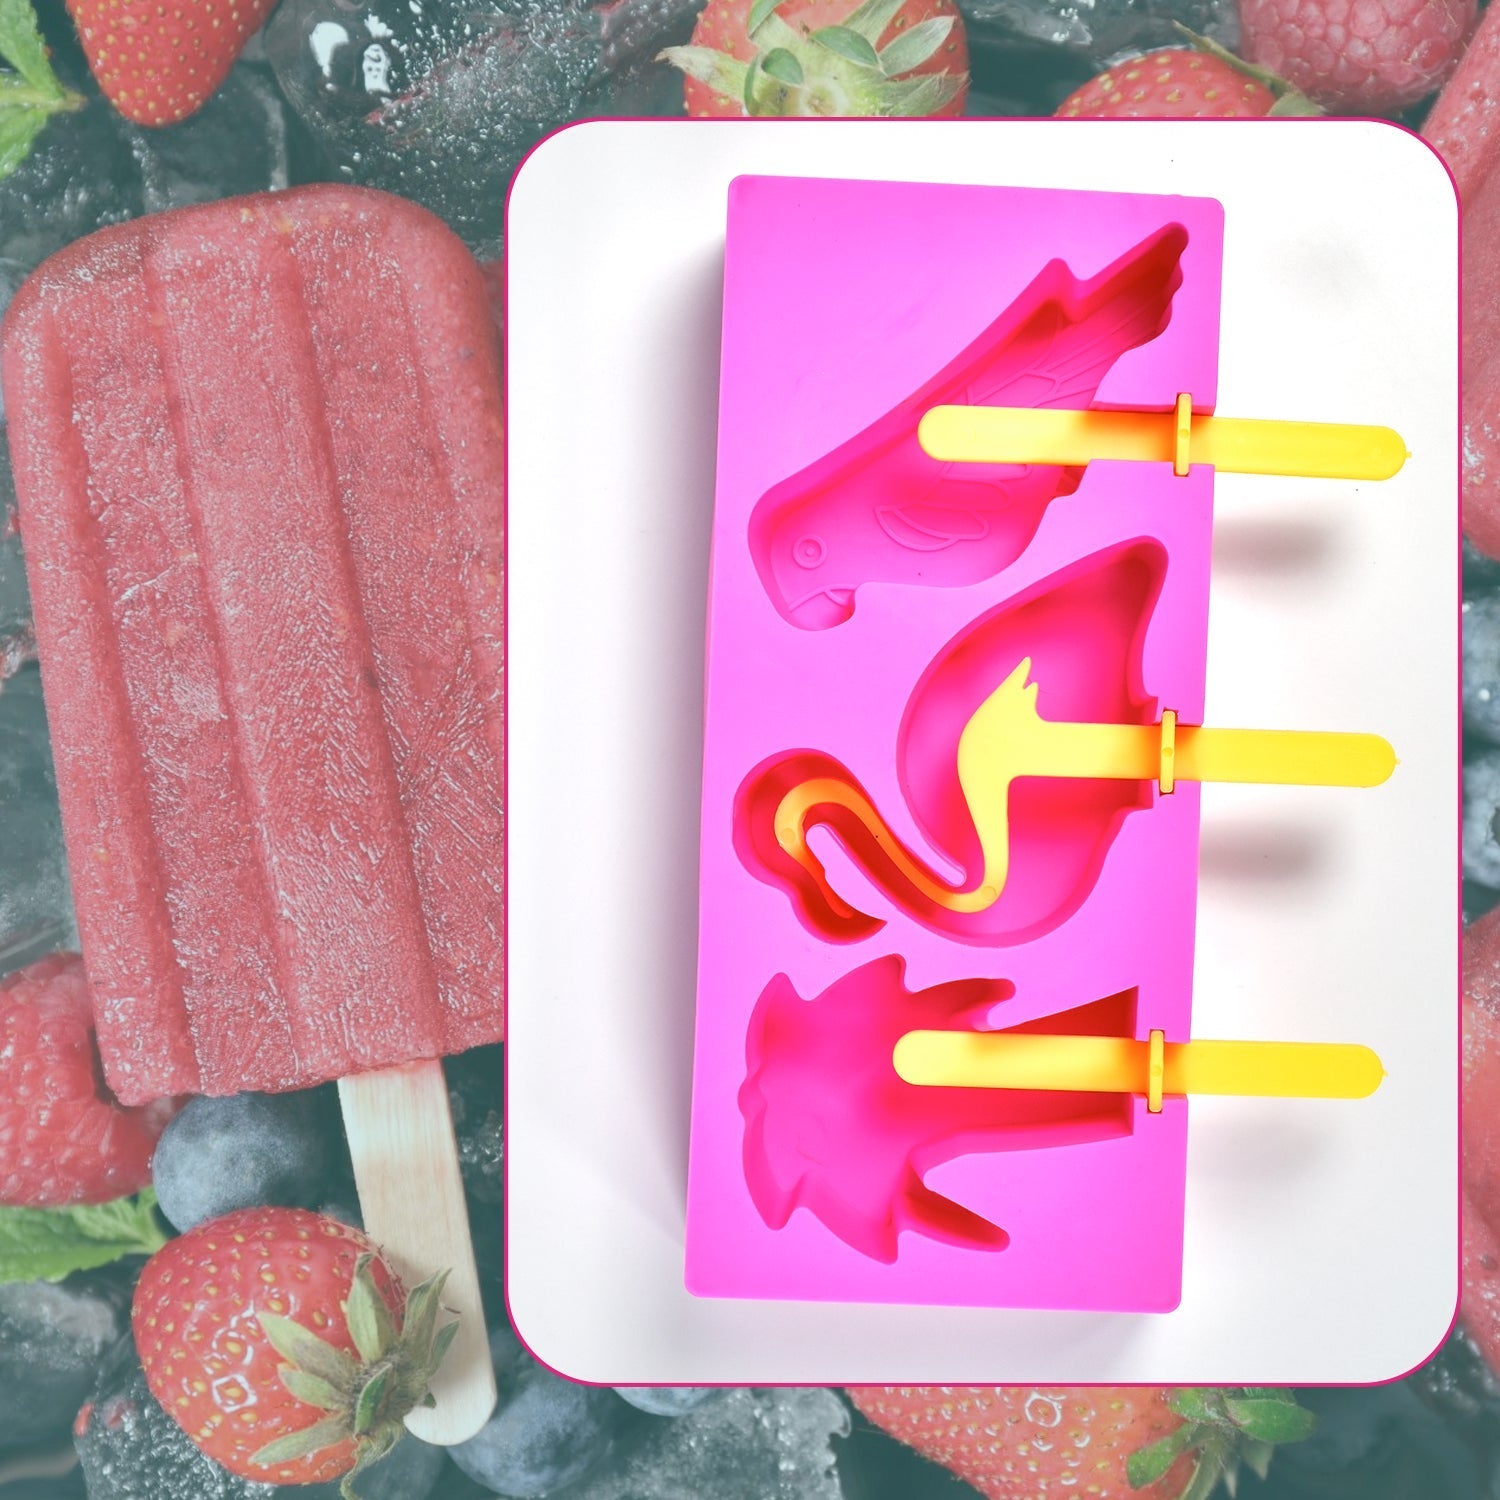 7168 Fancy Ice Candy Mould Maker Food Grade Homemade Reusable Ice Popsicle Makers Frozen Ice Cream Mould Sticks Kulfi Candy Ice Mold for Children & Adults DeoDap